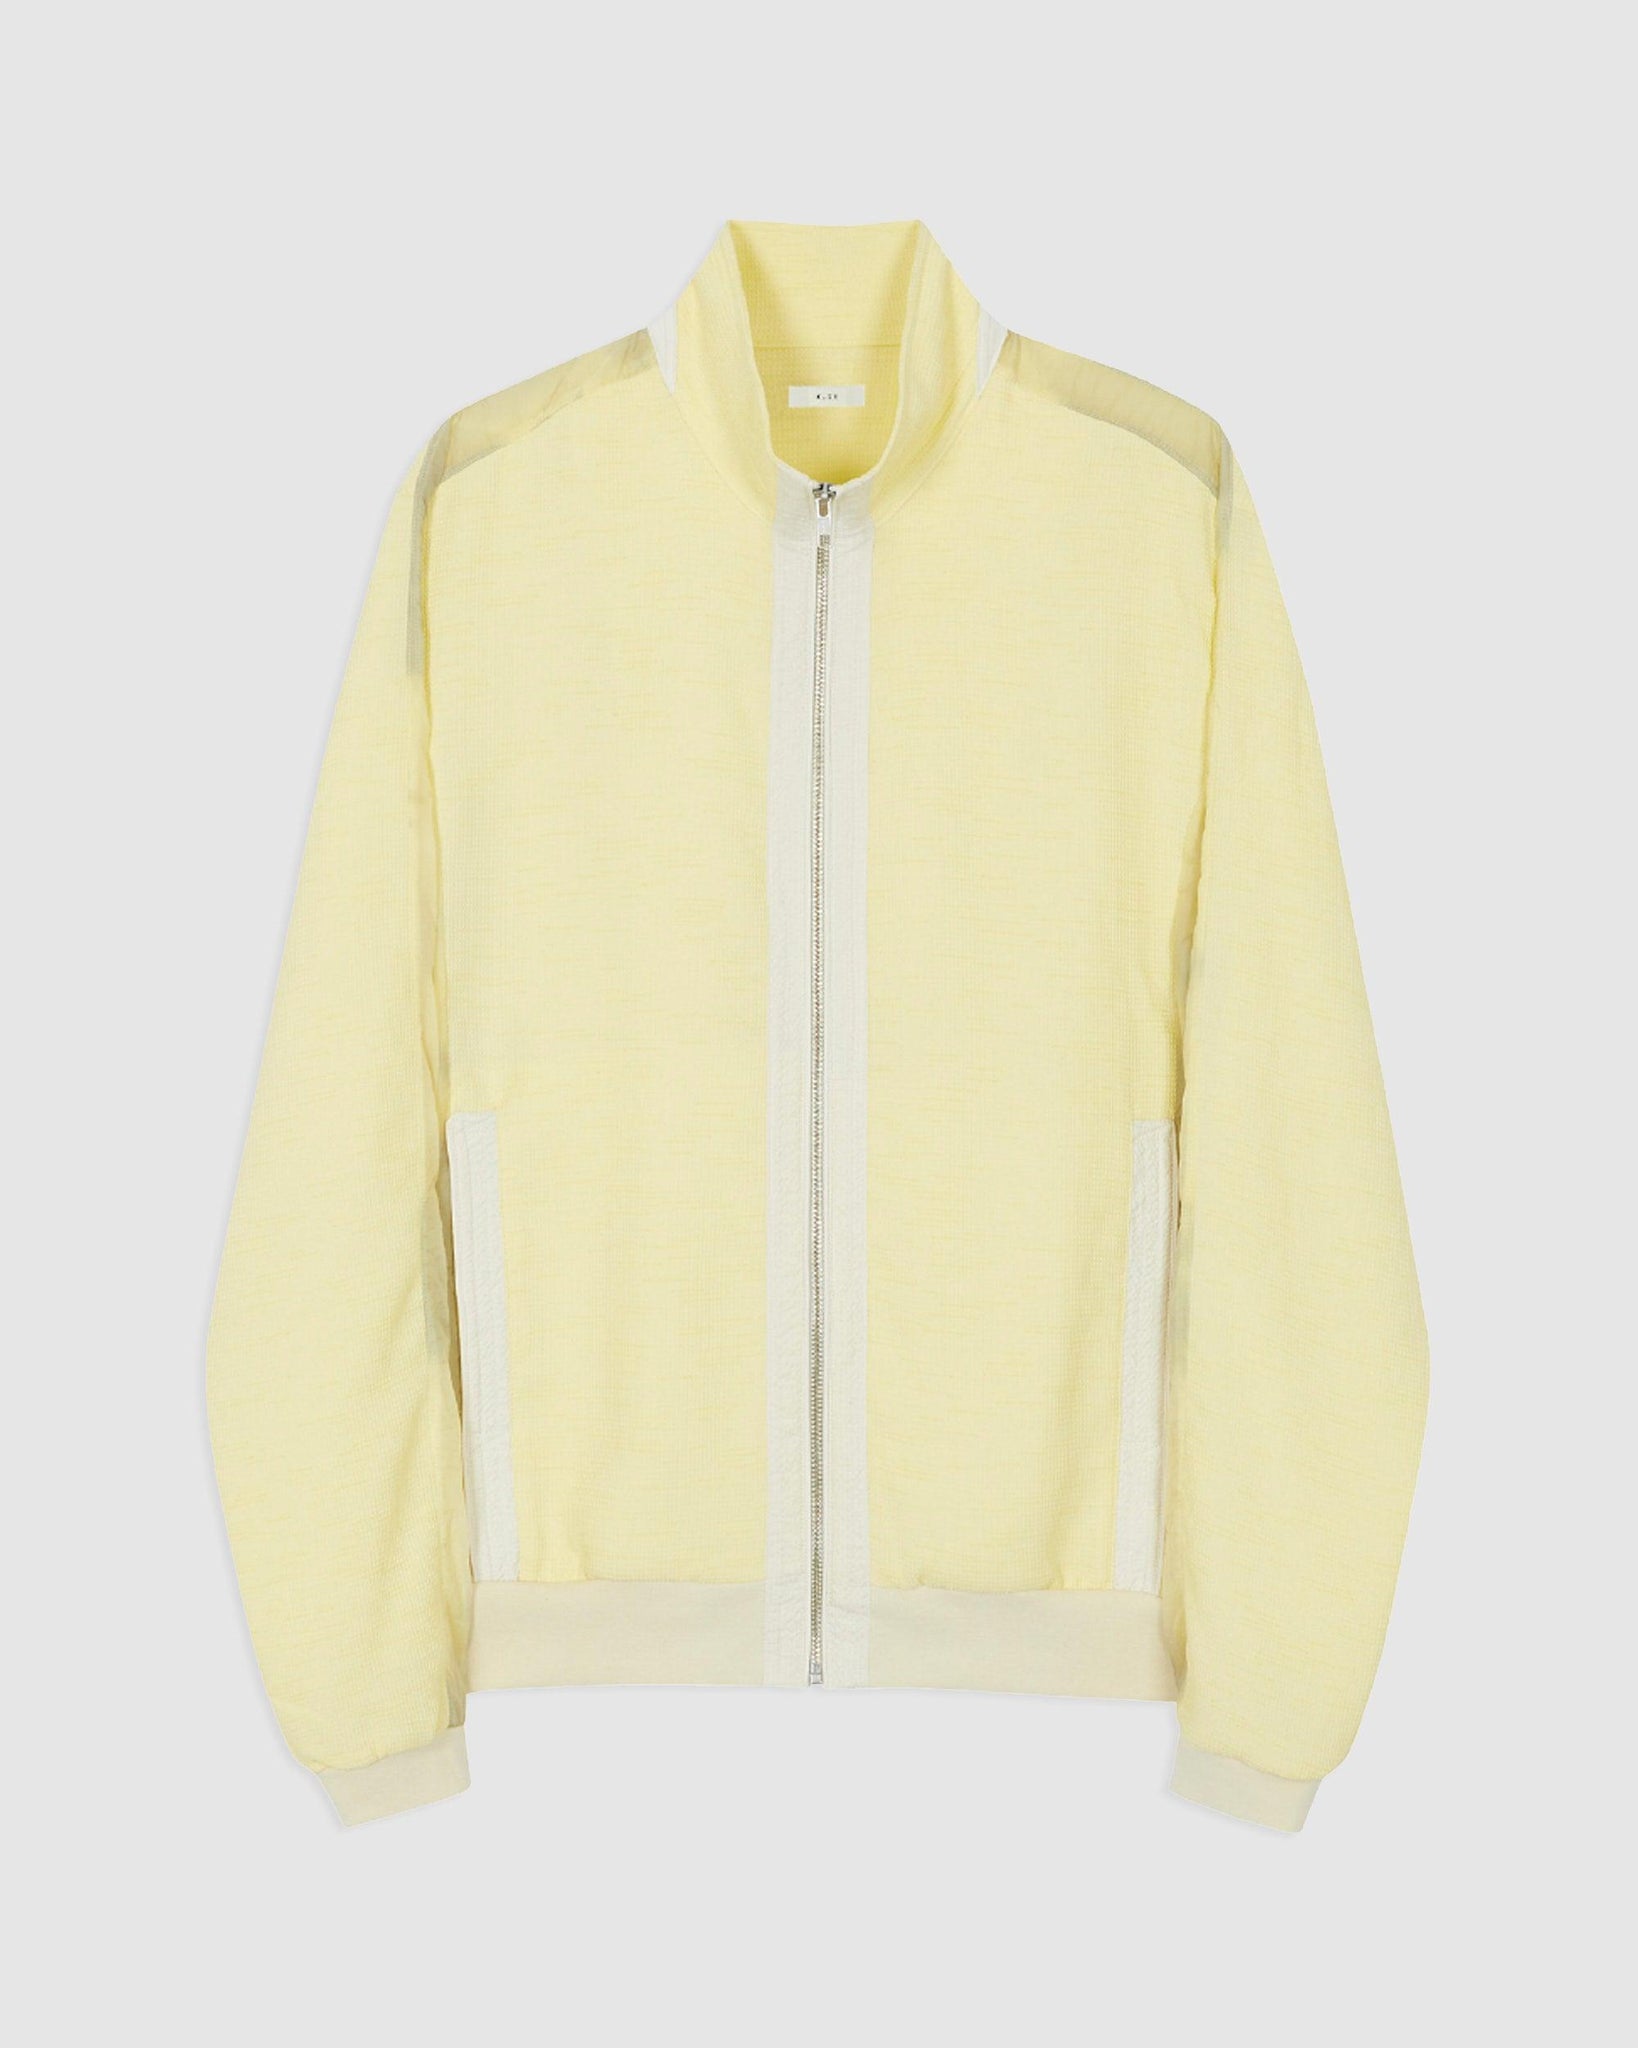 Lemon EP.3 01 Jersey Waffle Jacket - {{ collection.title }} - Chinatown Country Club 